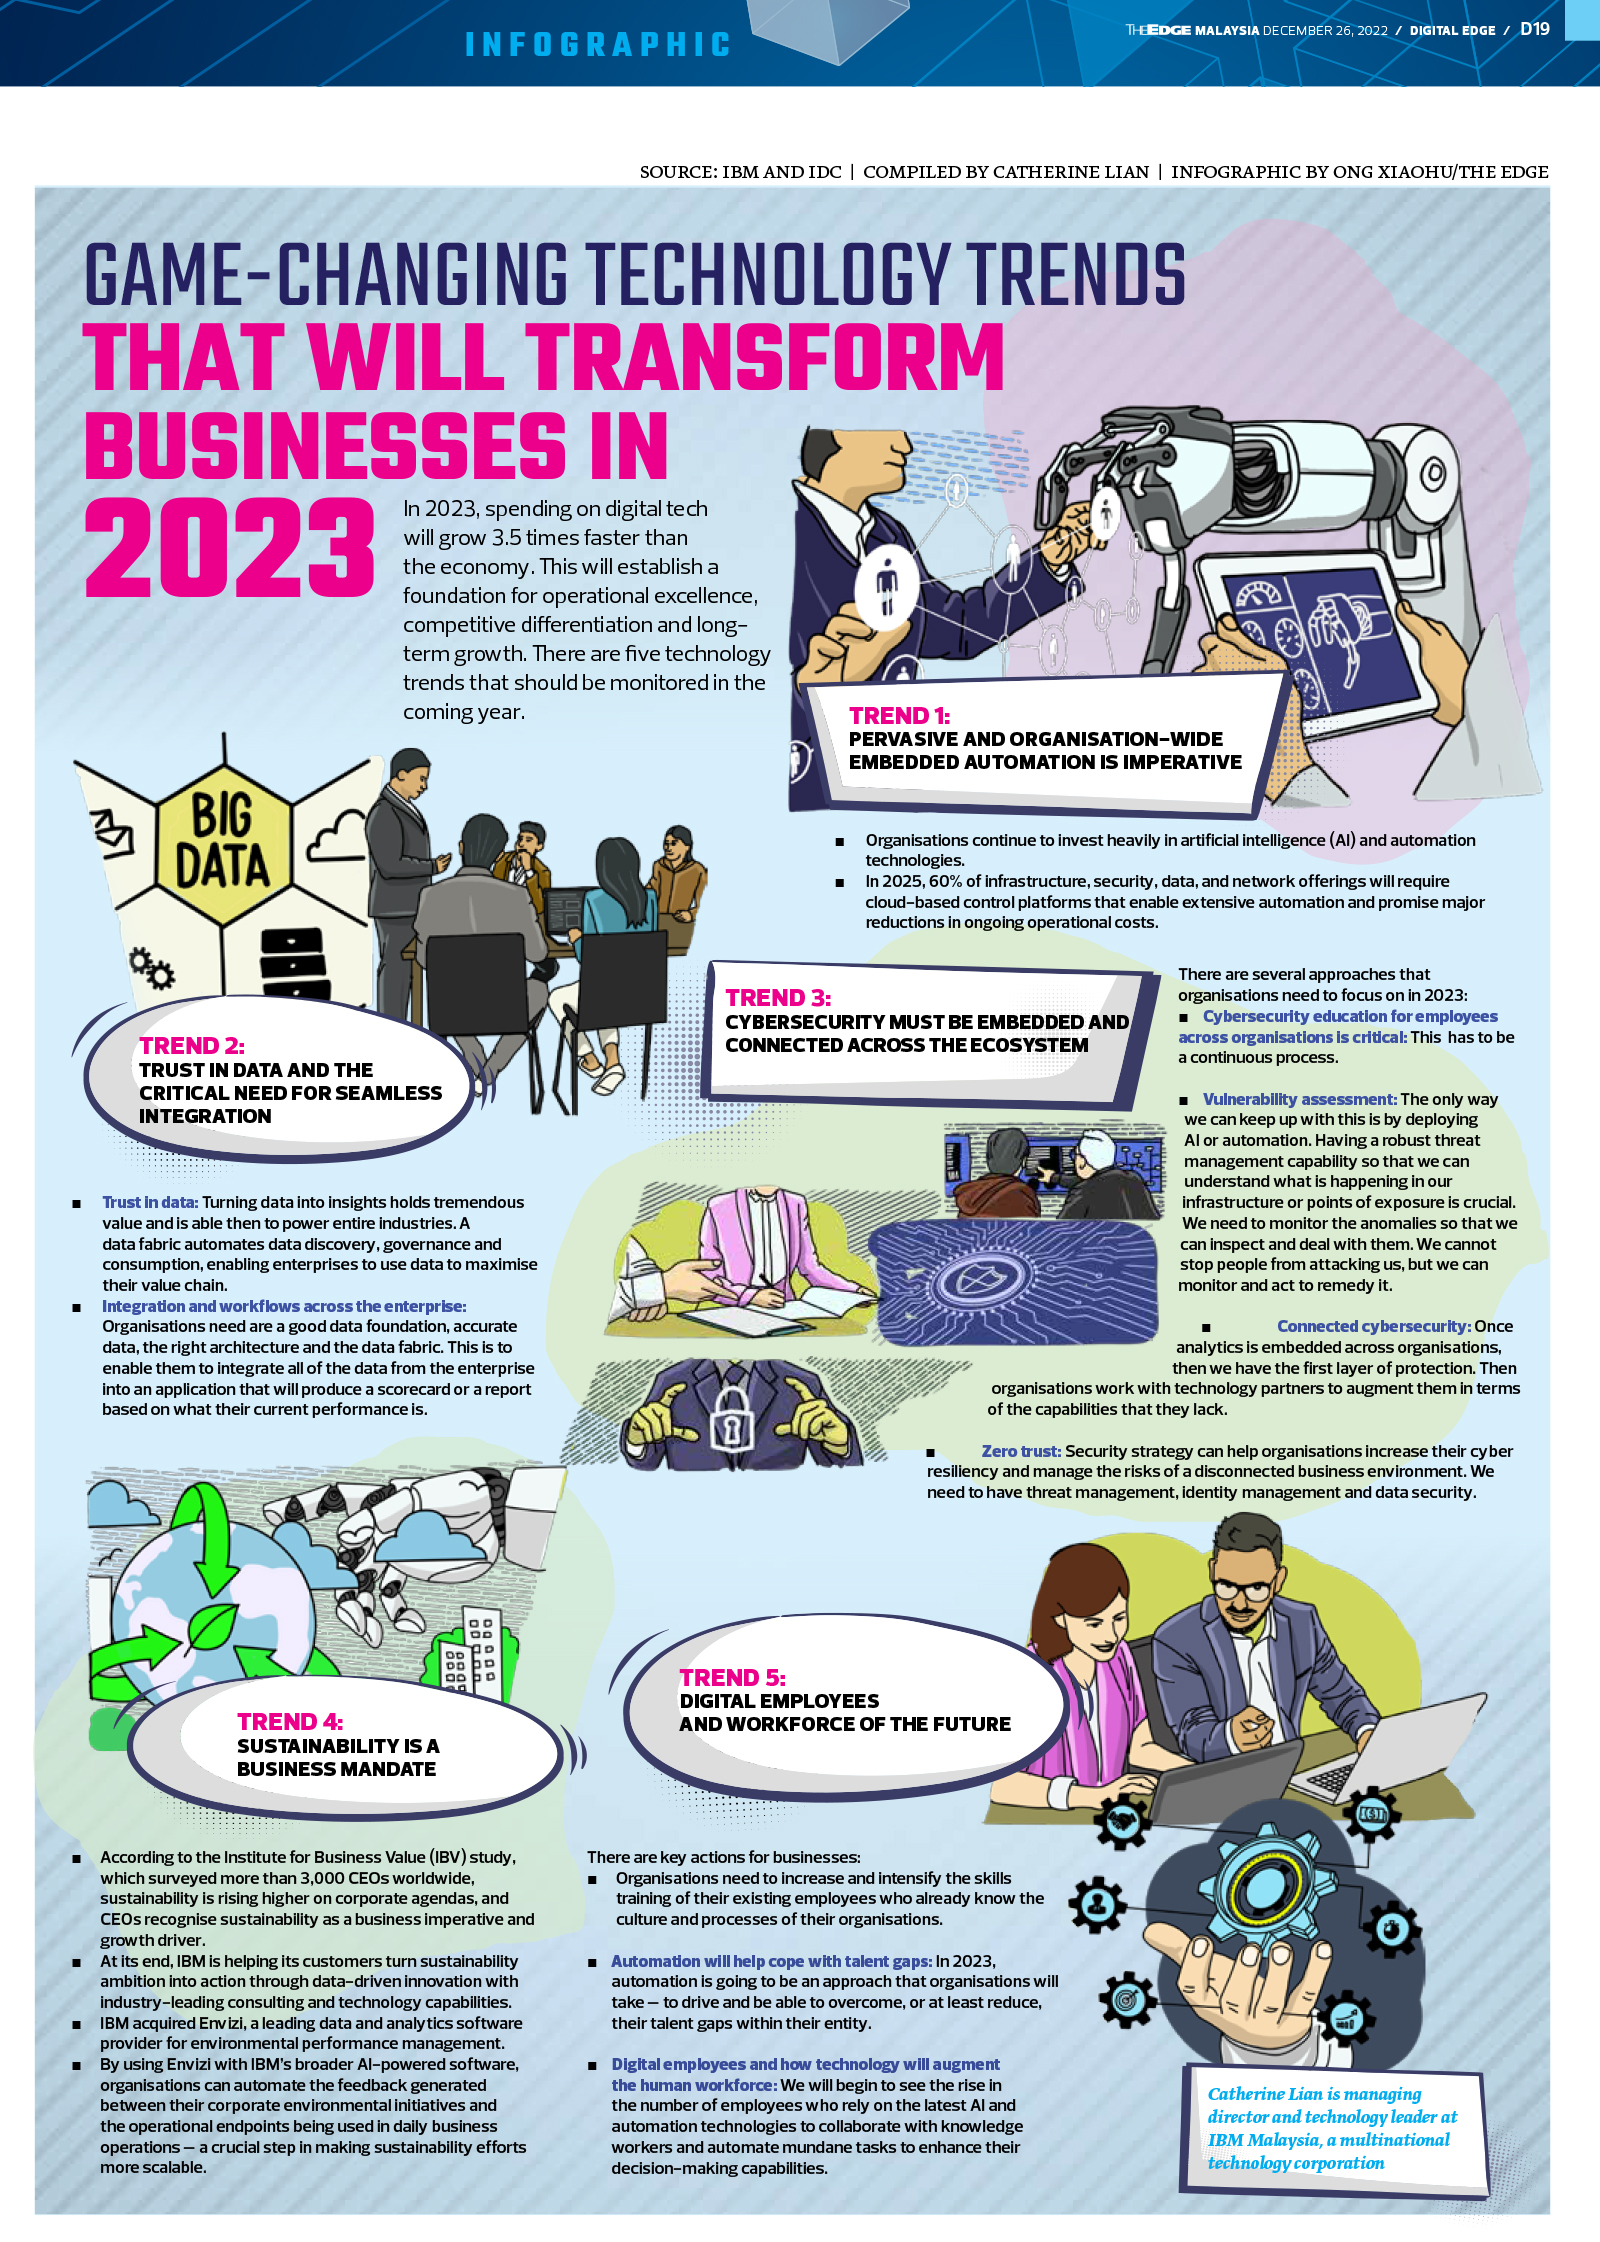 Game-Changing Technology Trends To Transform Businesses in 2023